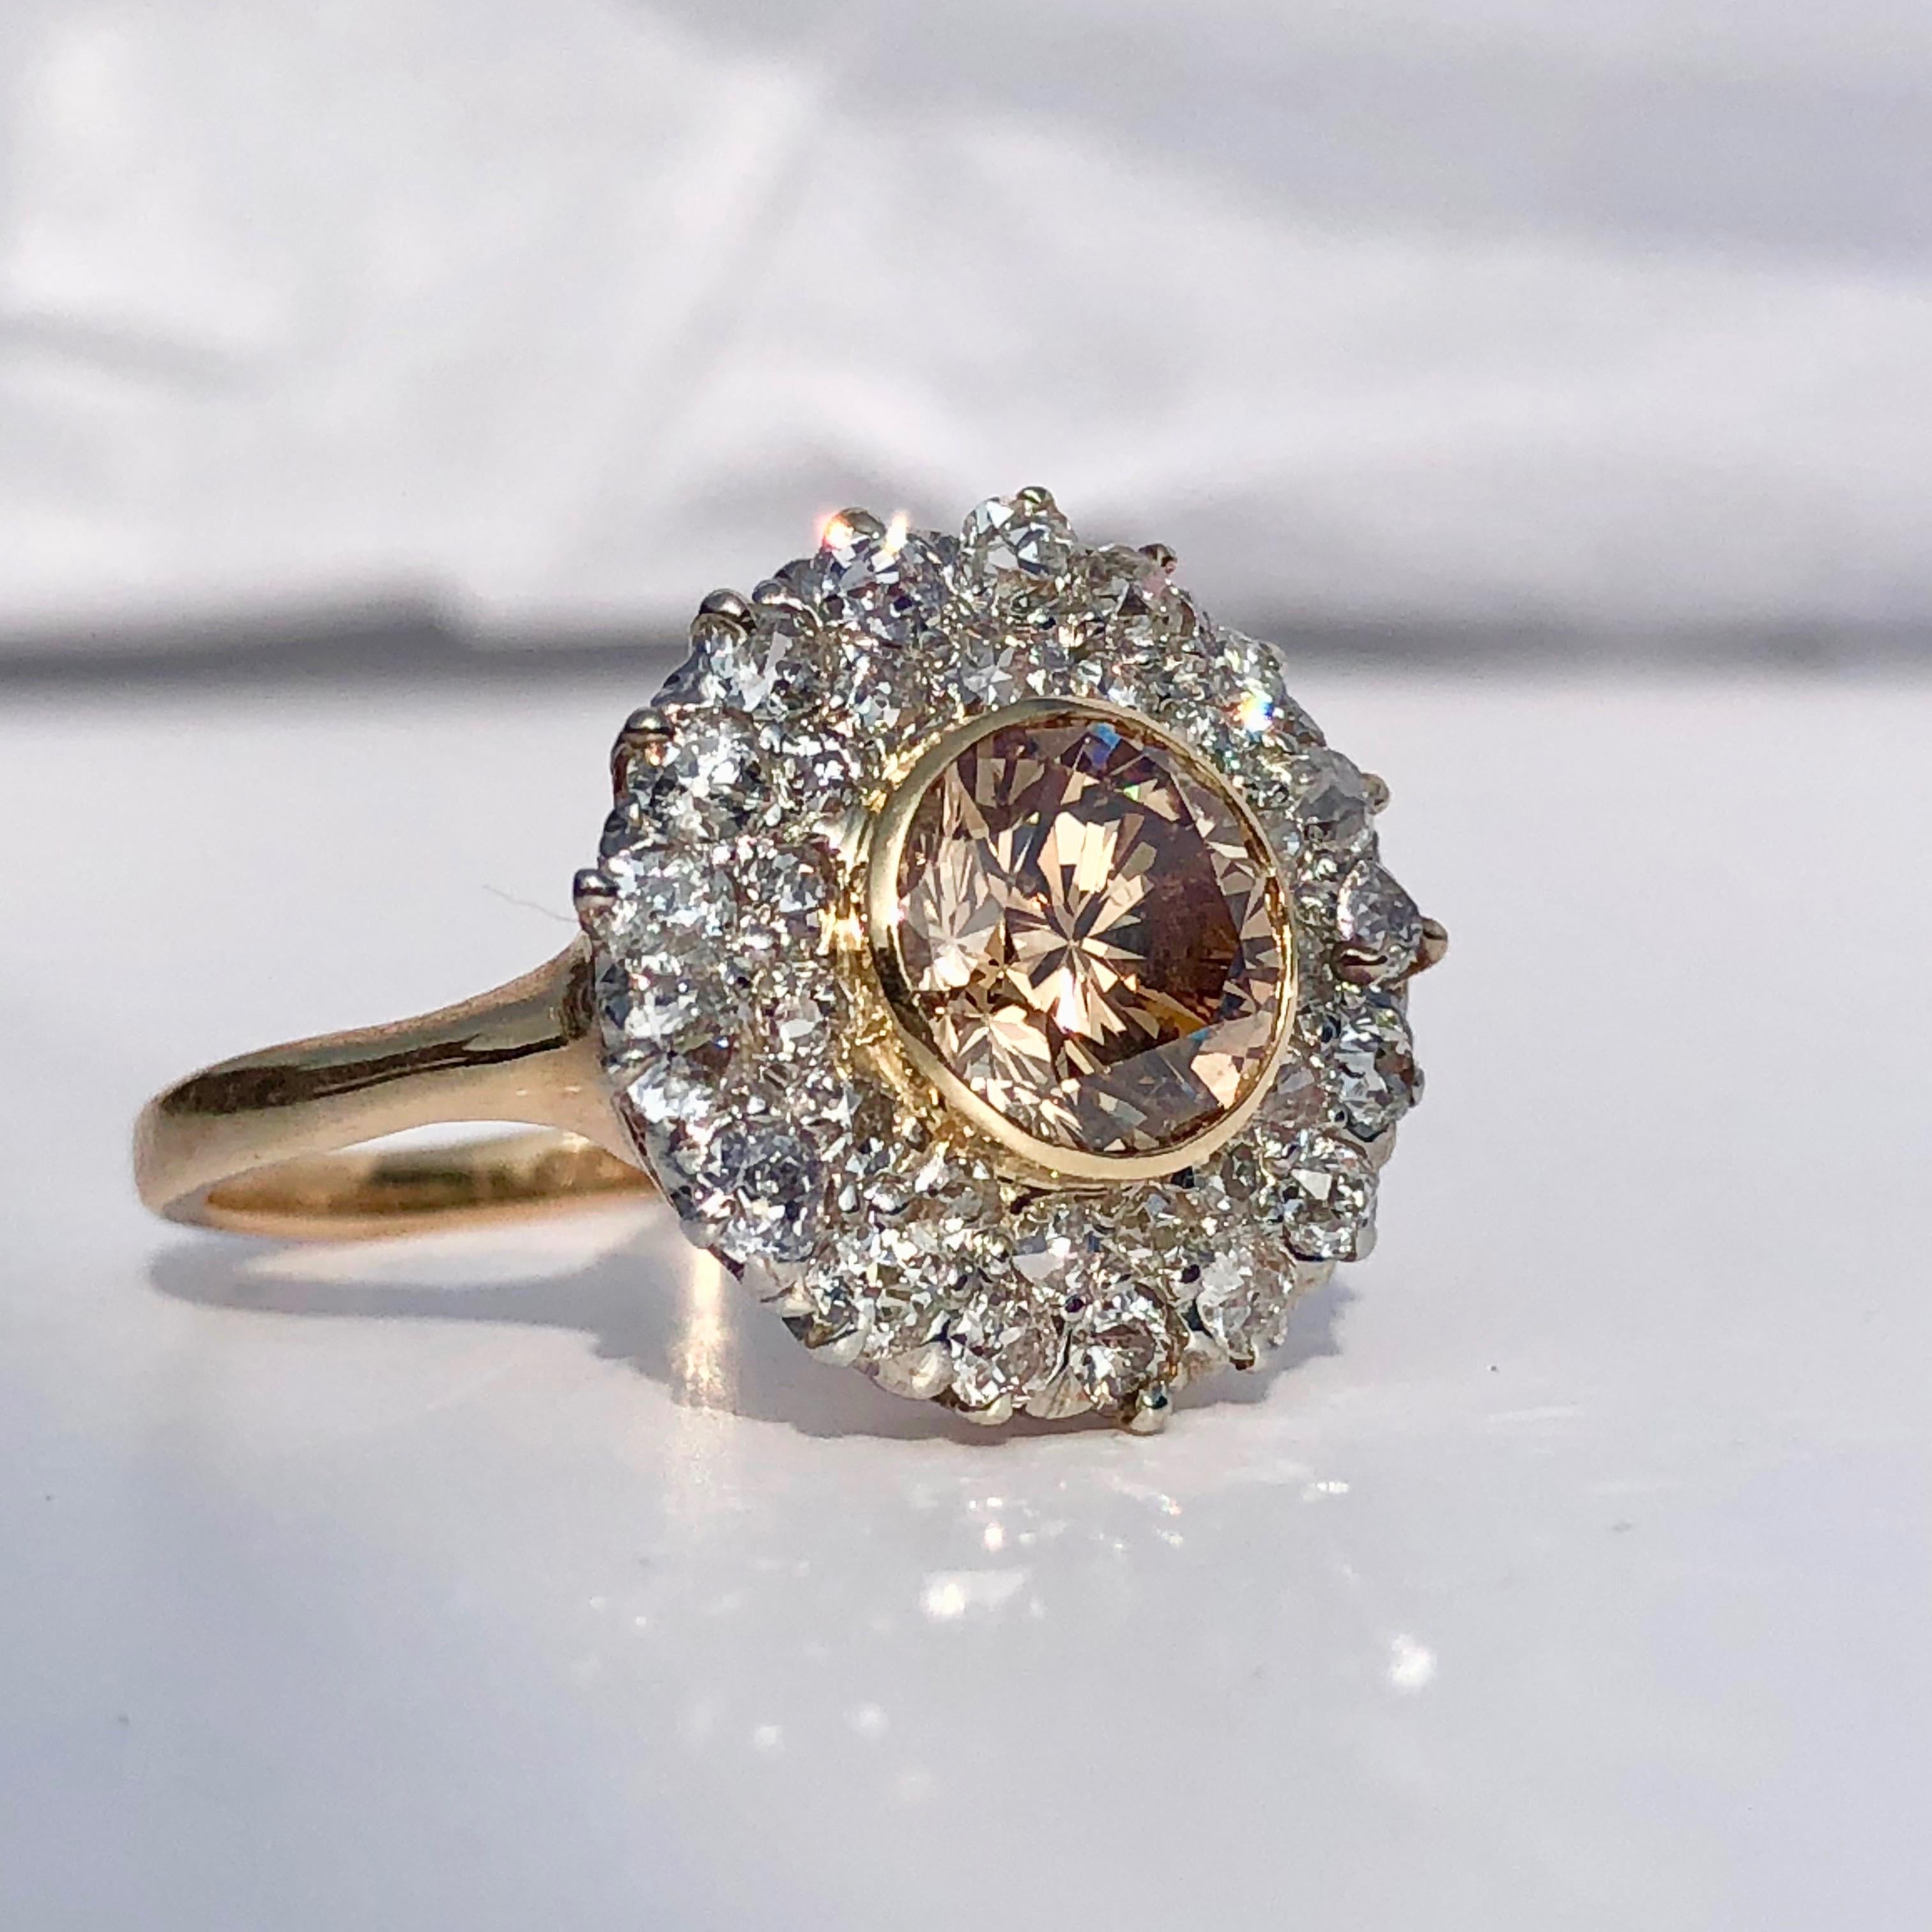 A rare peachy champagne diamond ring

The round brilliant cut principal diamond is a stunning hue, quite mesmerising.

The central diamond in a yellow gold collet setting with the old cut round white diamonds are each secured within claws - a